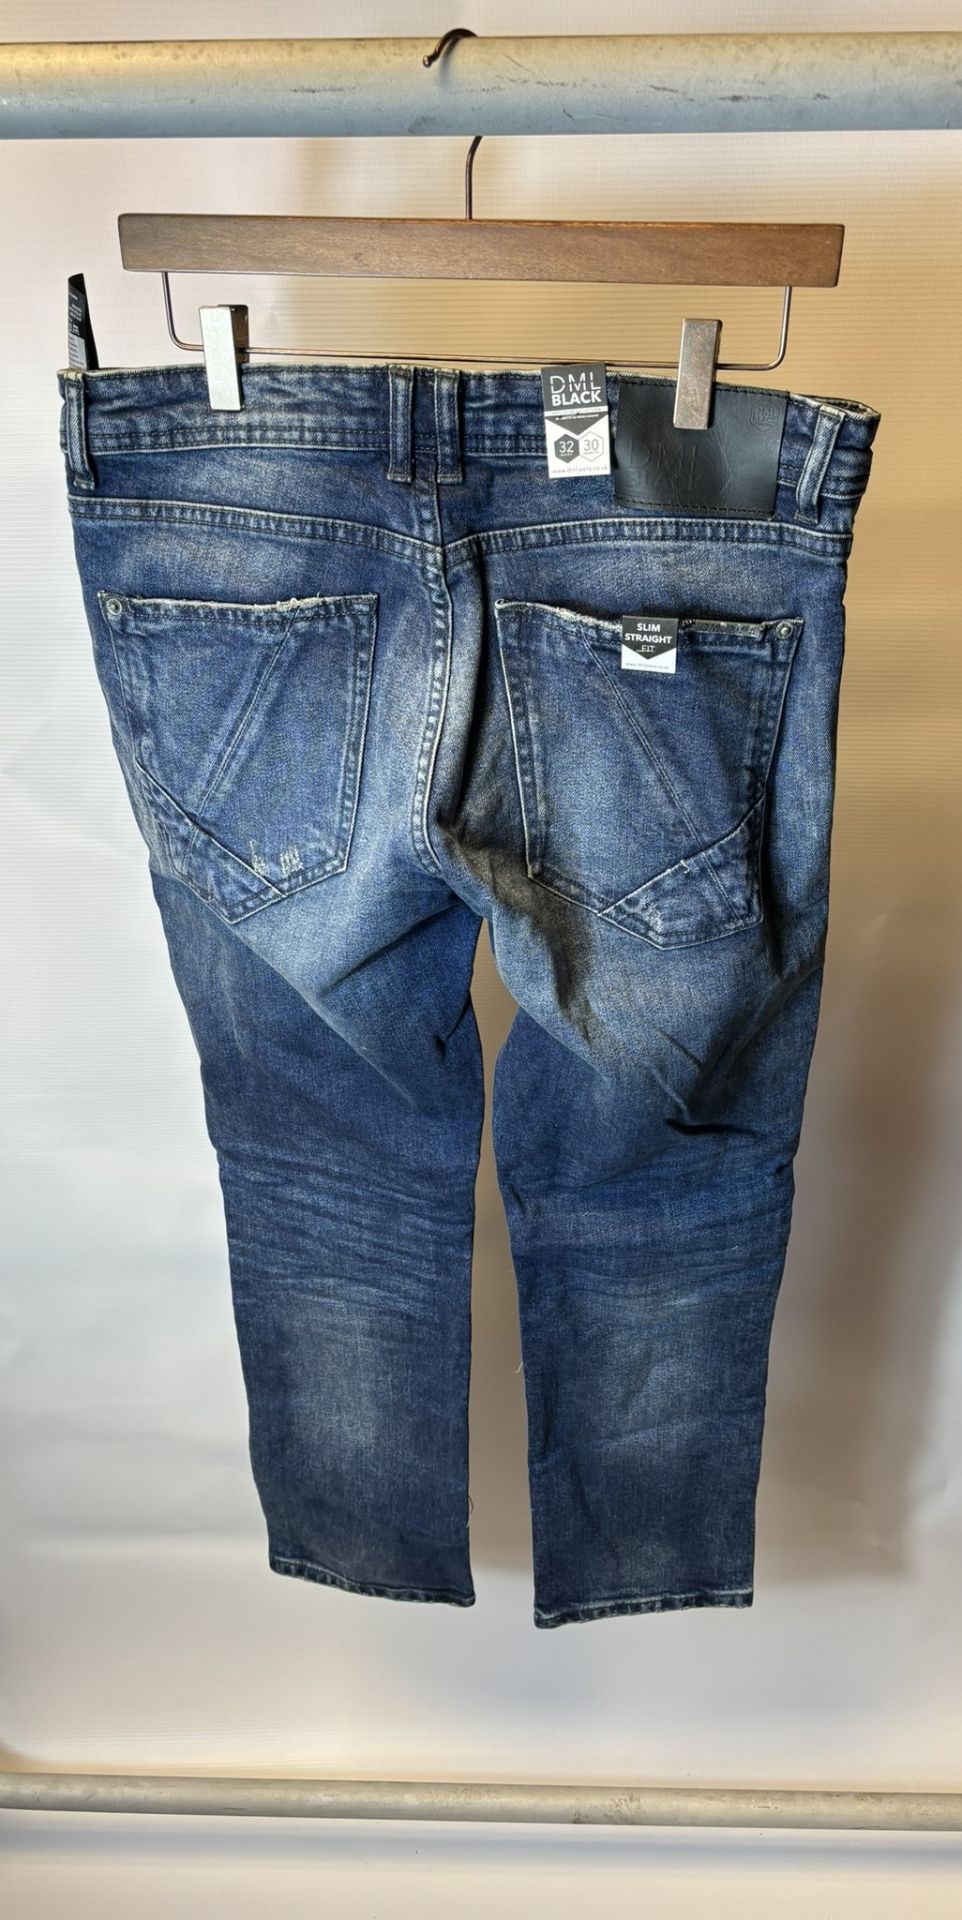 13 x Pairs Of various Sized DML Jeans Prophecy & Voyage Blue Jeans - Image 38 of 39